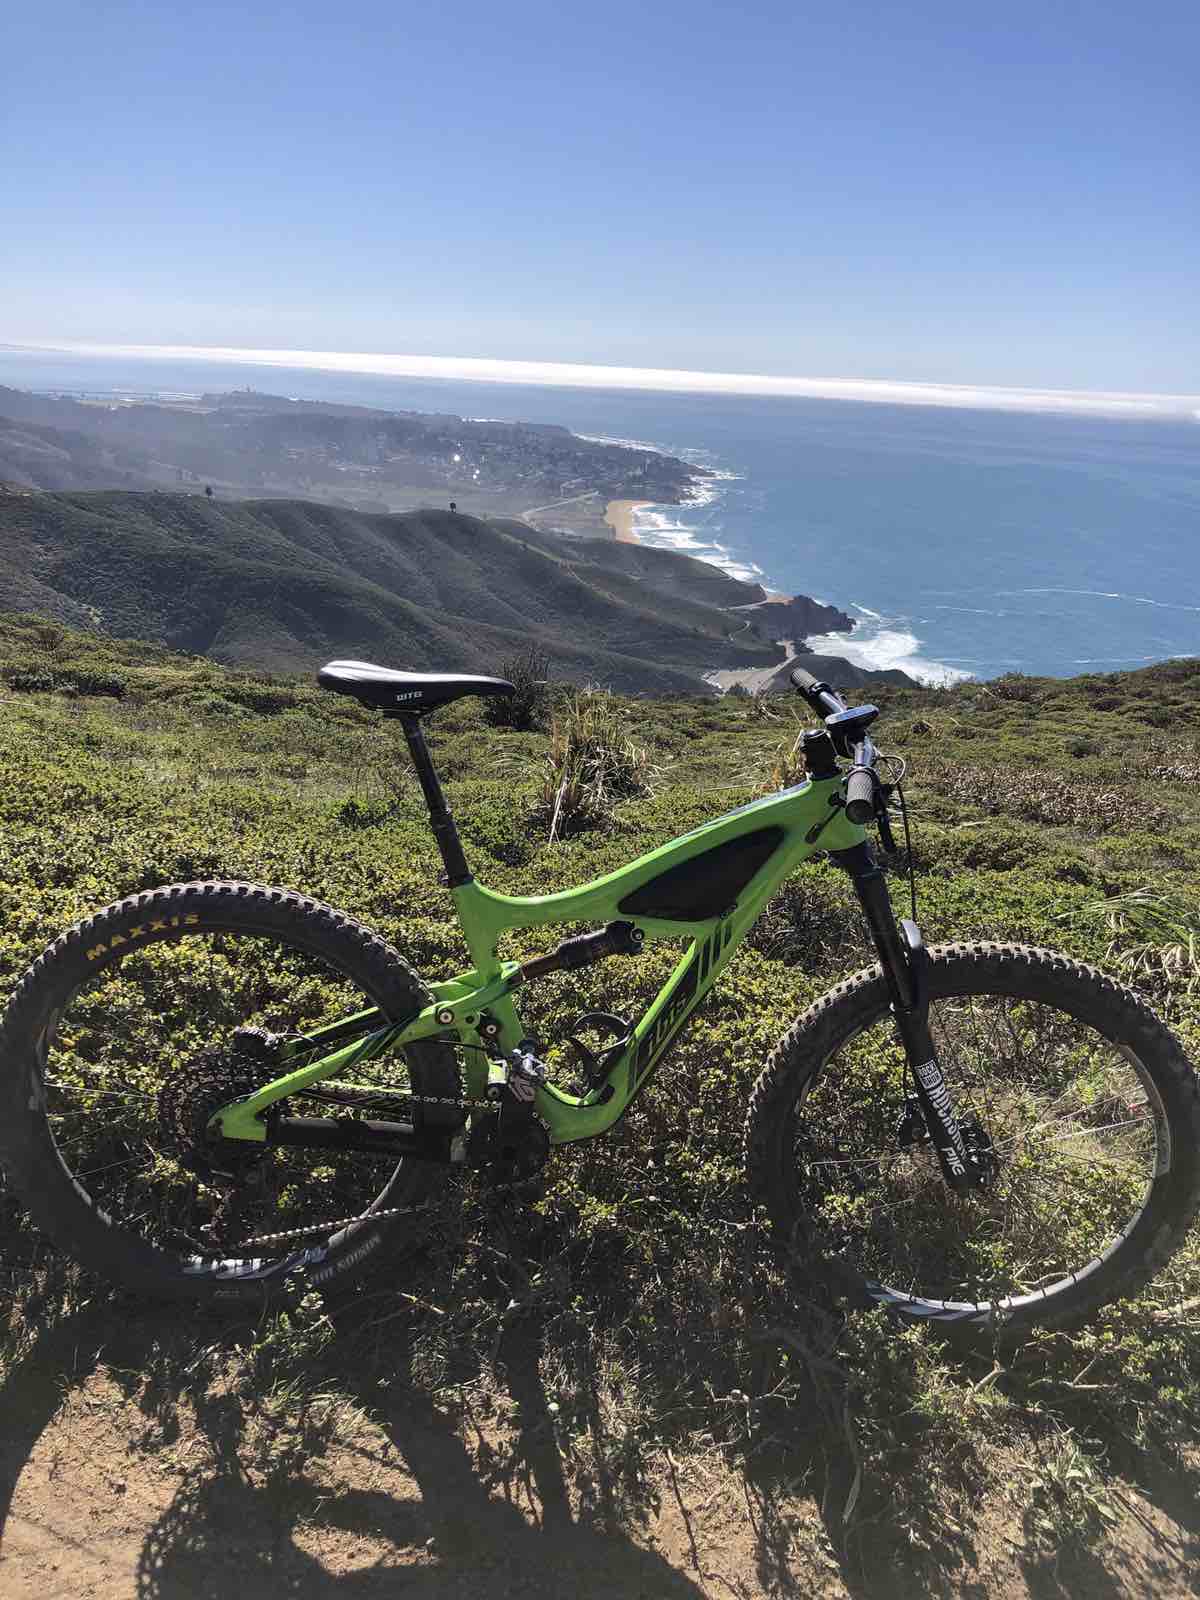 bikerumor pic of the day Pacifica, California, ibis mountain bike on a trail with the coastline down below